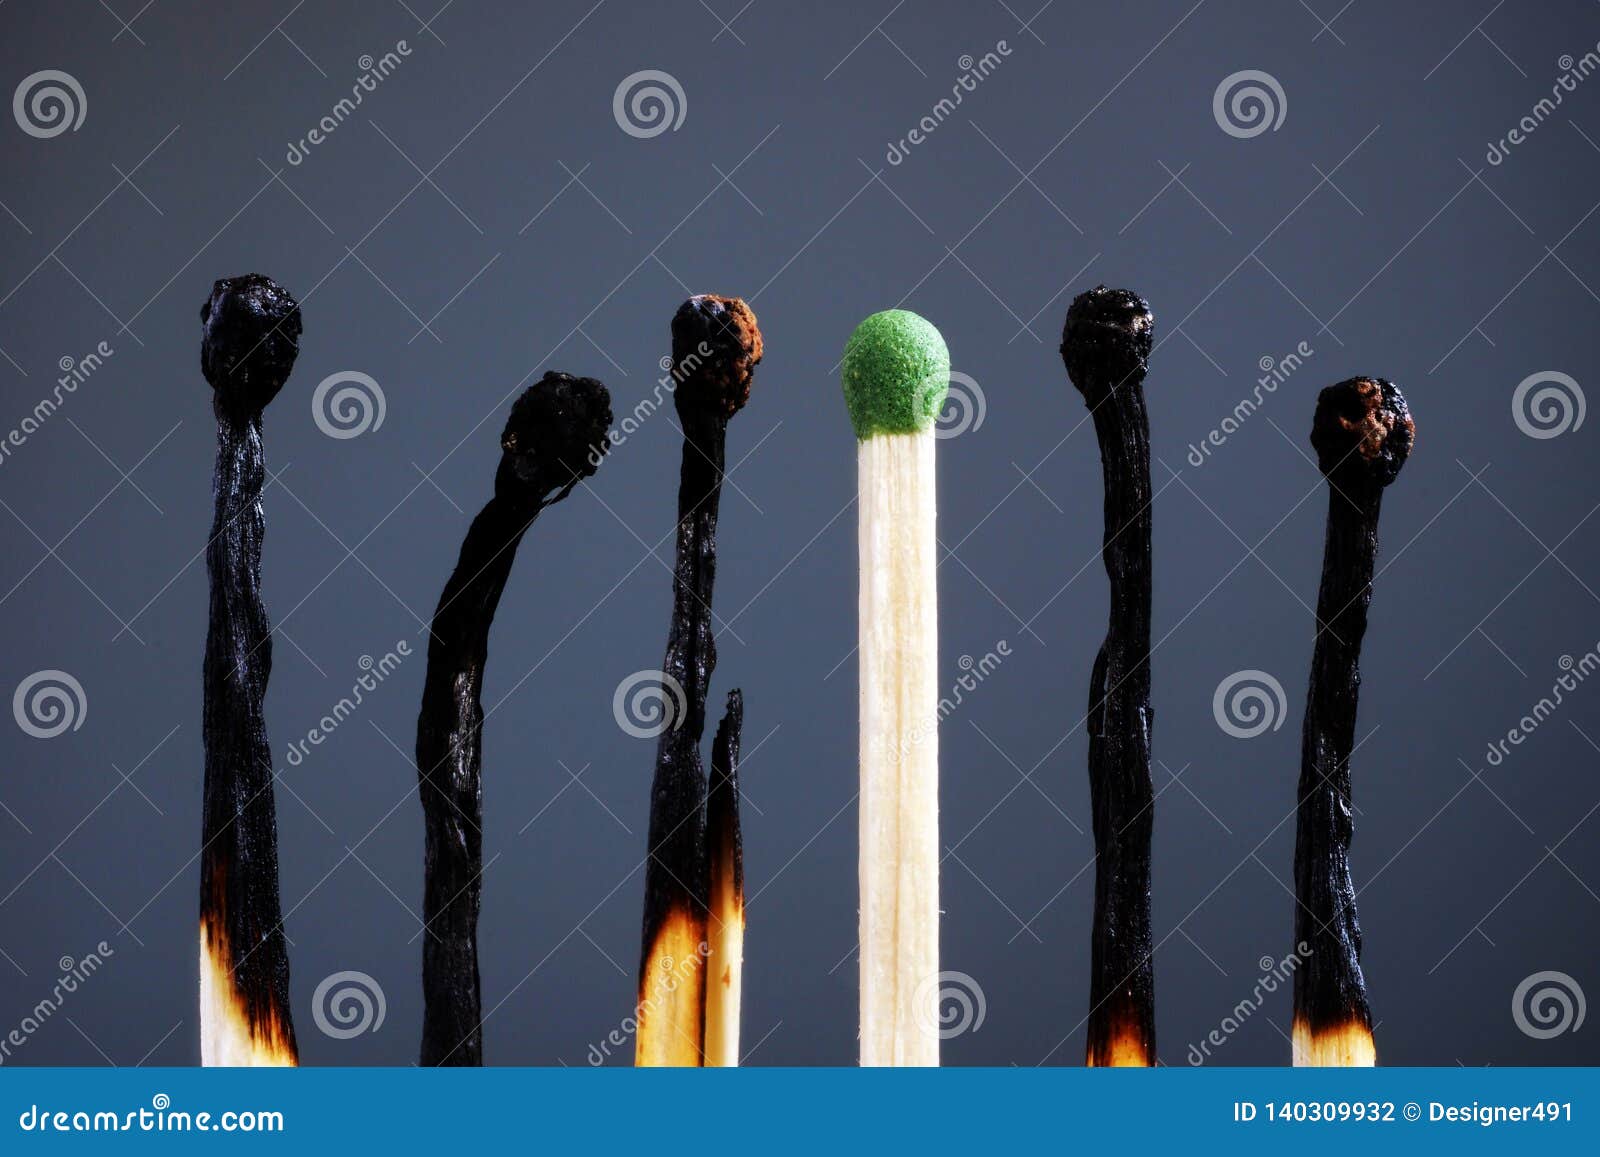 line of burnt matches and one brand new. individuality, leadership, burnout at work and energy